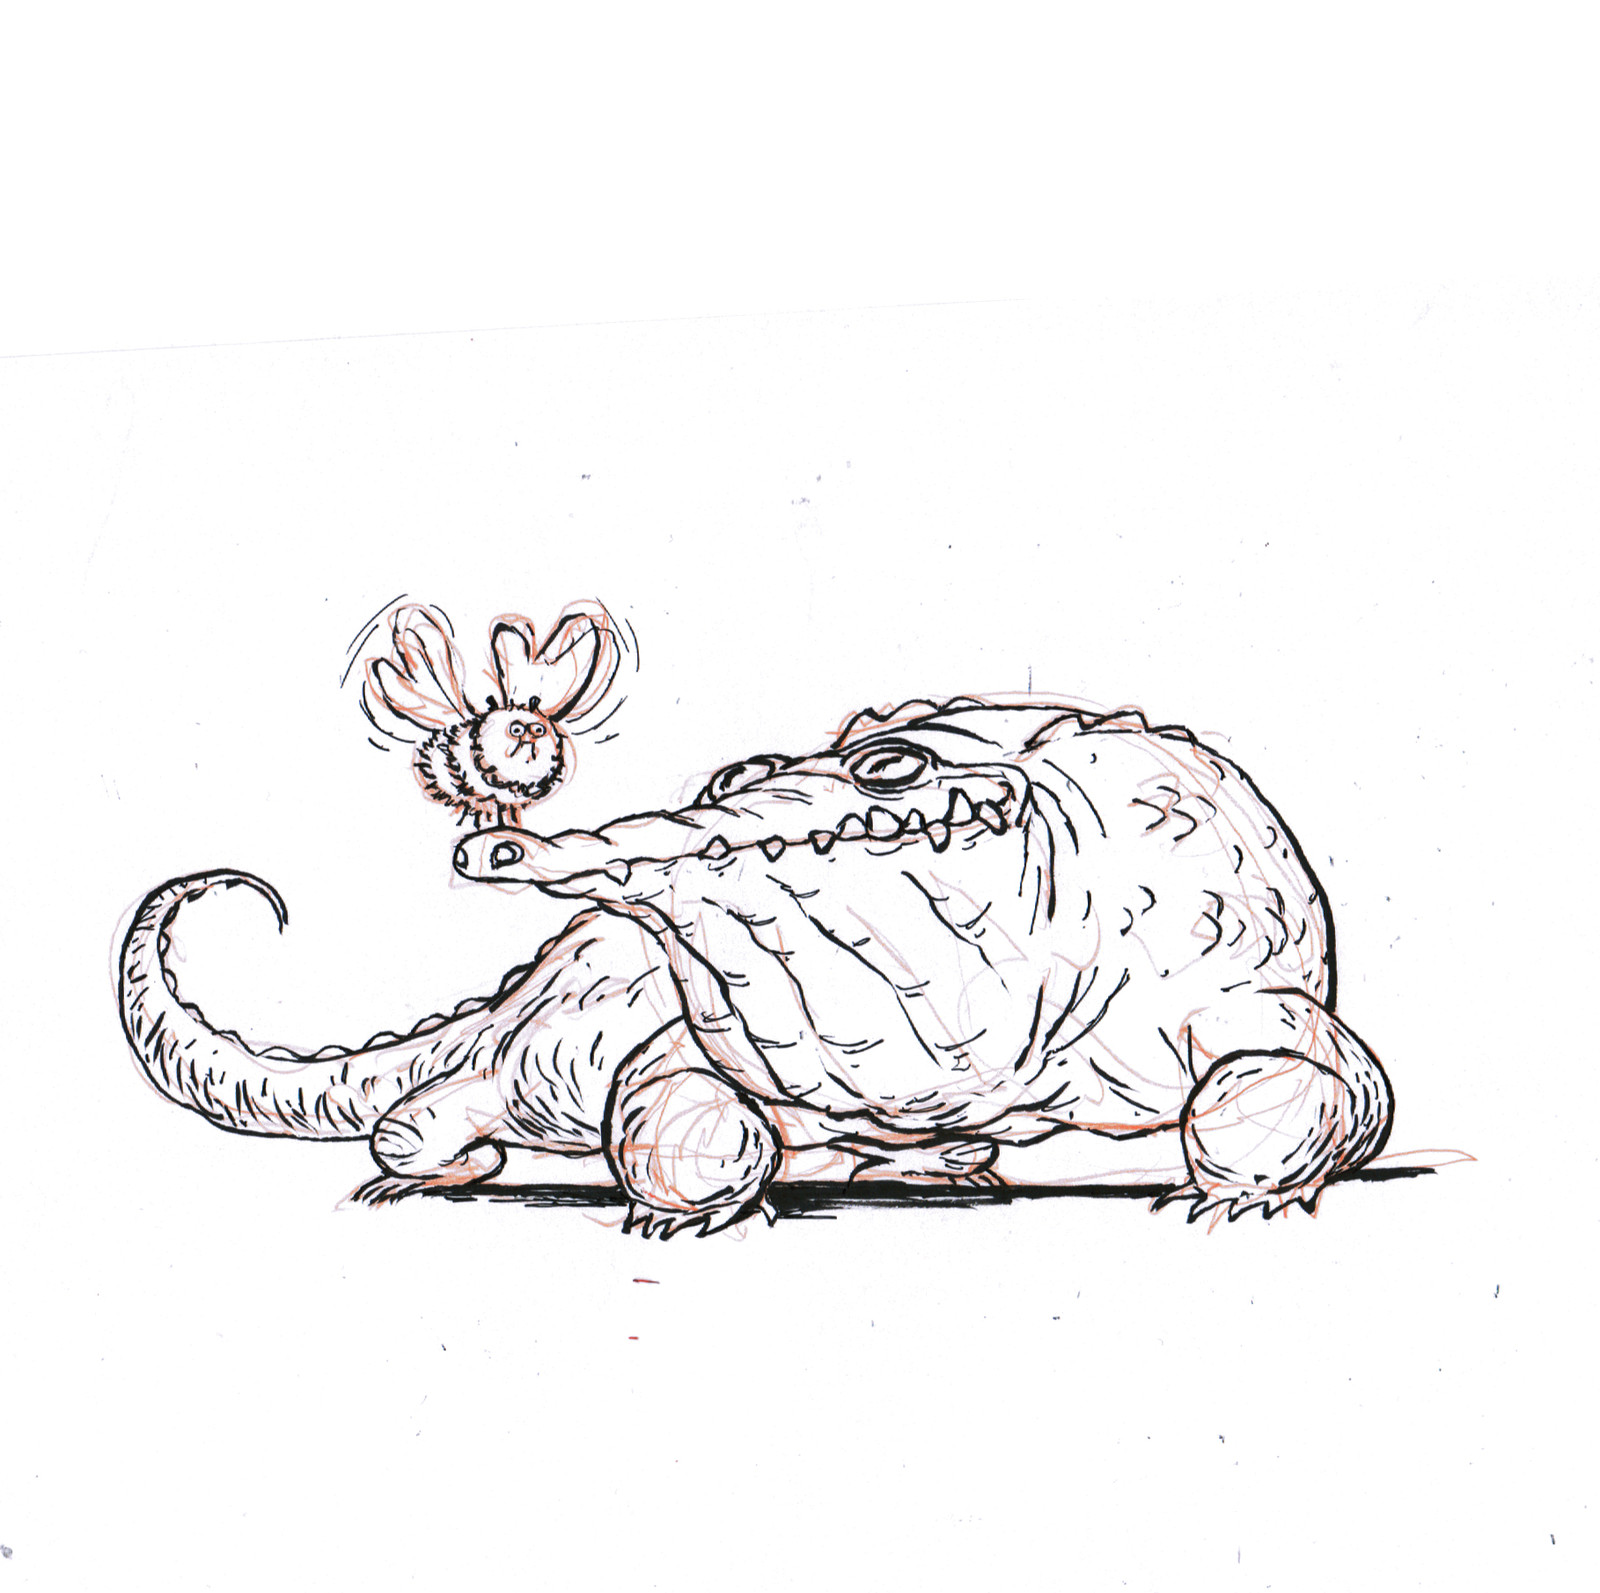 Gator and a bumble fly. 
#sketch #dailydoodle